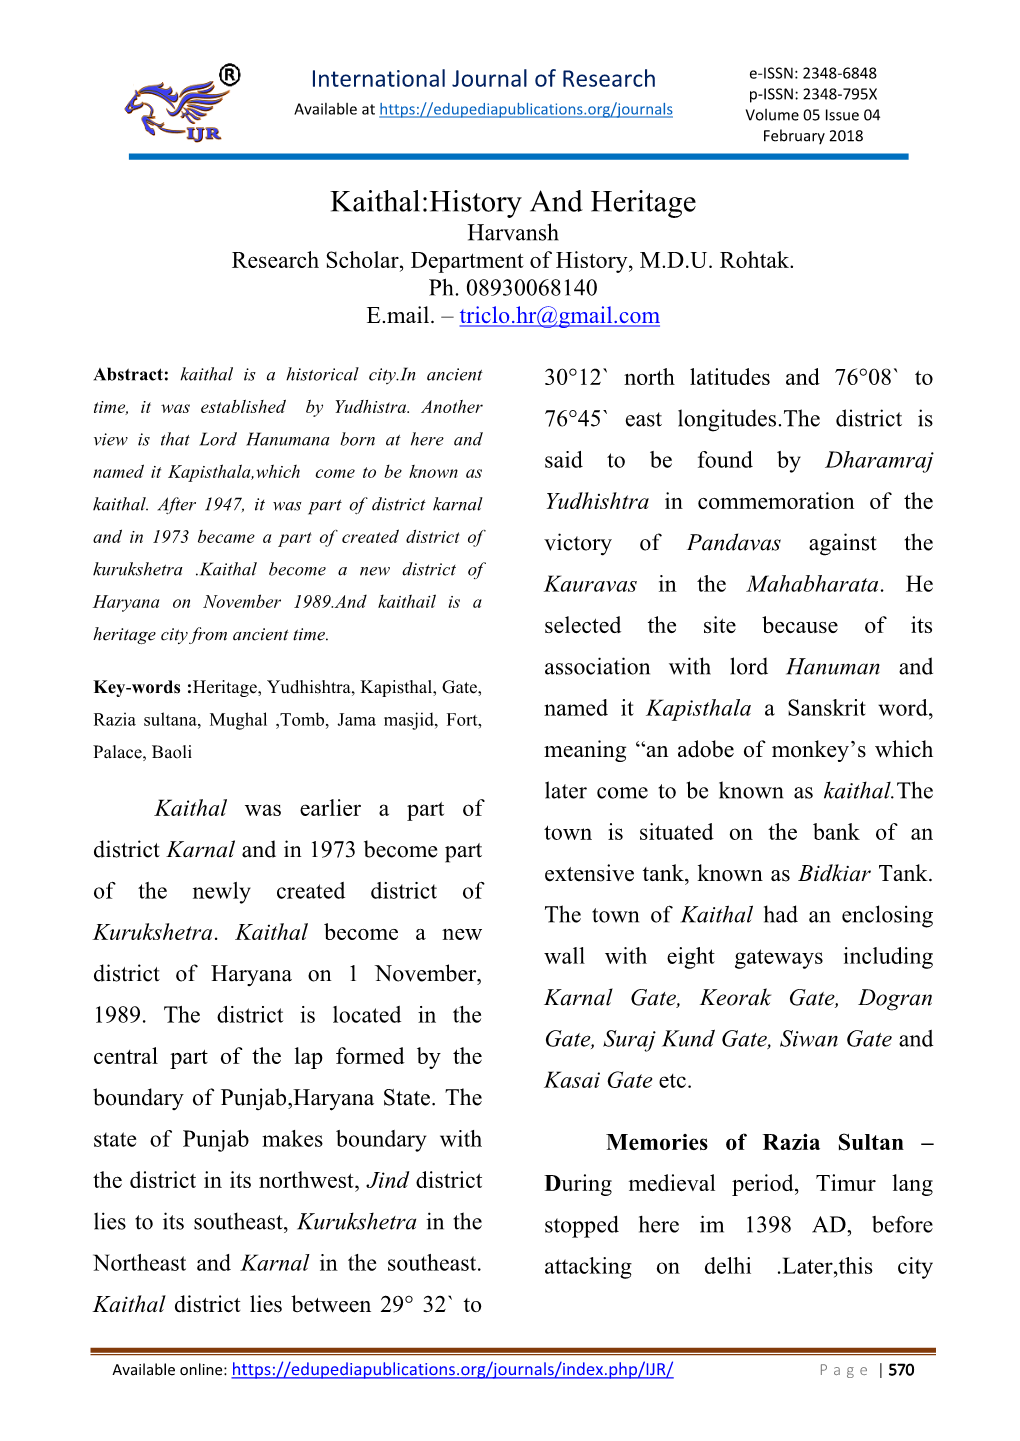 Kaithal:History and Heritage Harvansh Research Scholar, Department of History, M.D.U